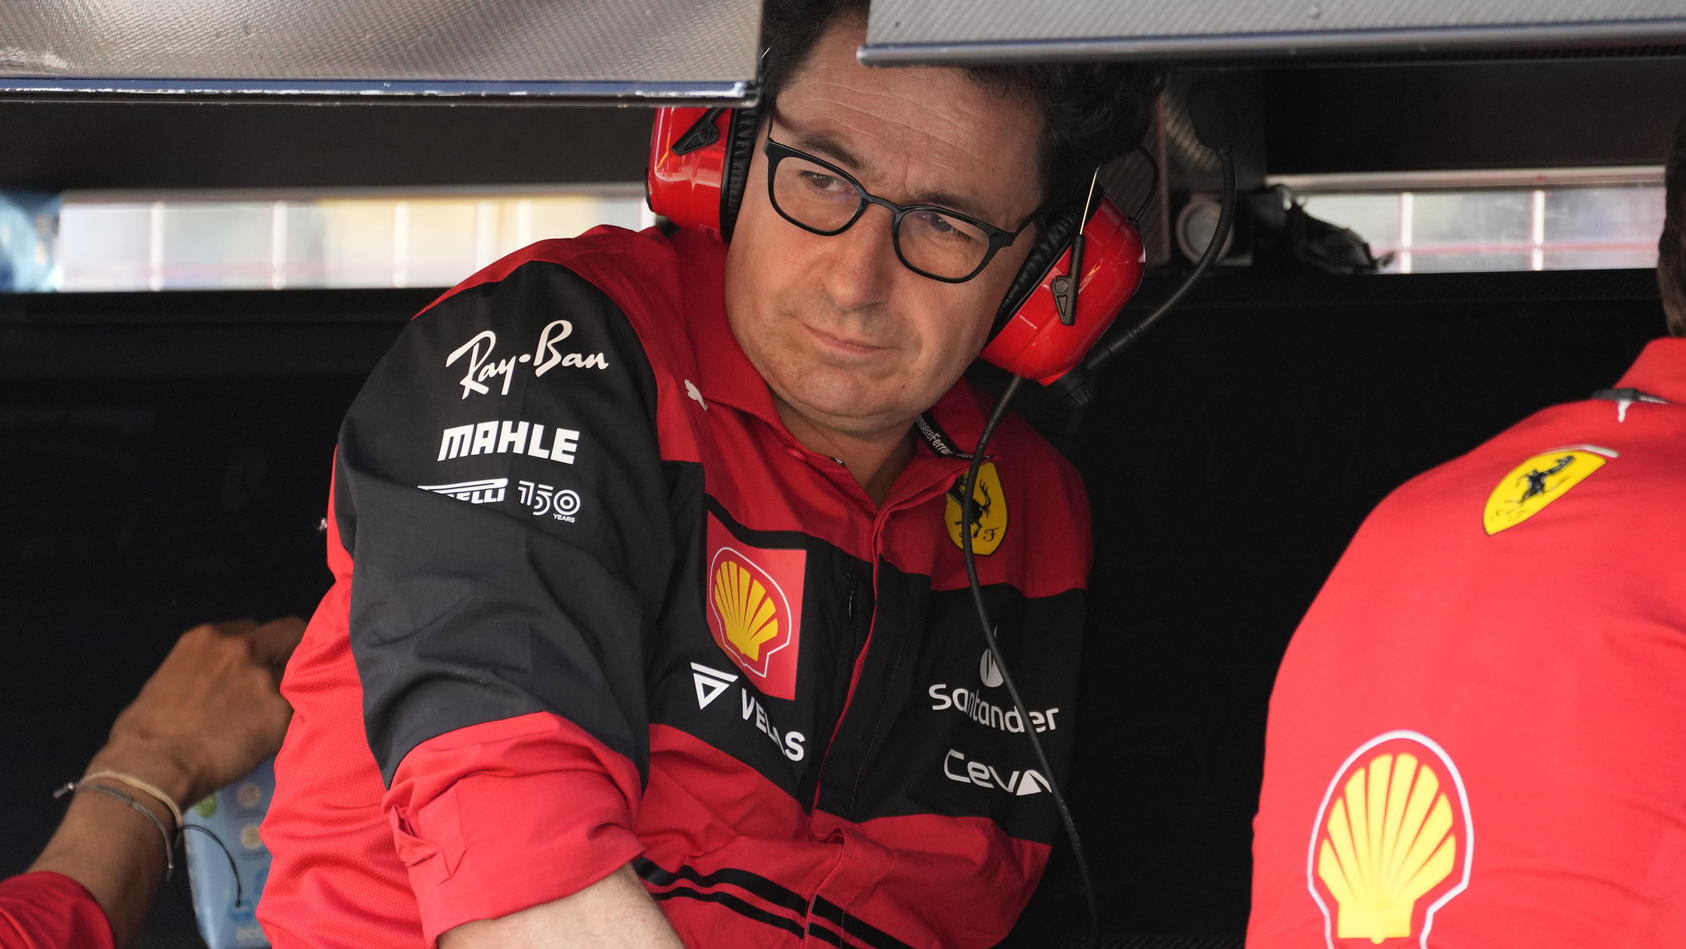 Ferrari team chief Mattia Binotto looks on during the second free practice session for the Hungarian Formula One Grand Prix at the Hungaroring racetrack in Mogyorod, near Budapest, Hungary, Friday, July 29, 2022. The Hungarian Formula One Grand Prix 